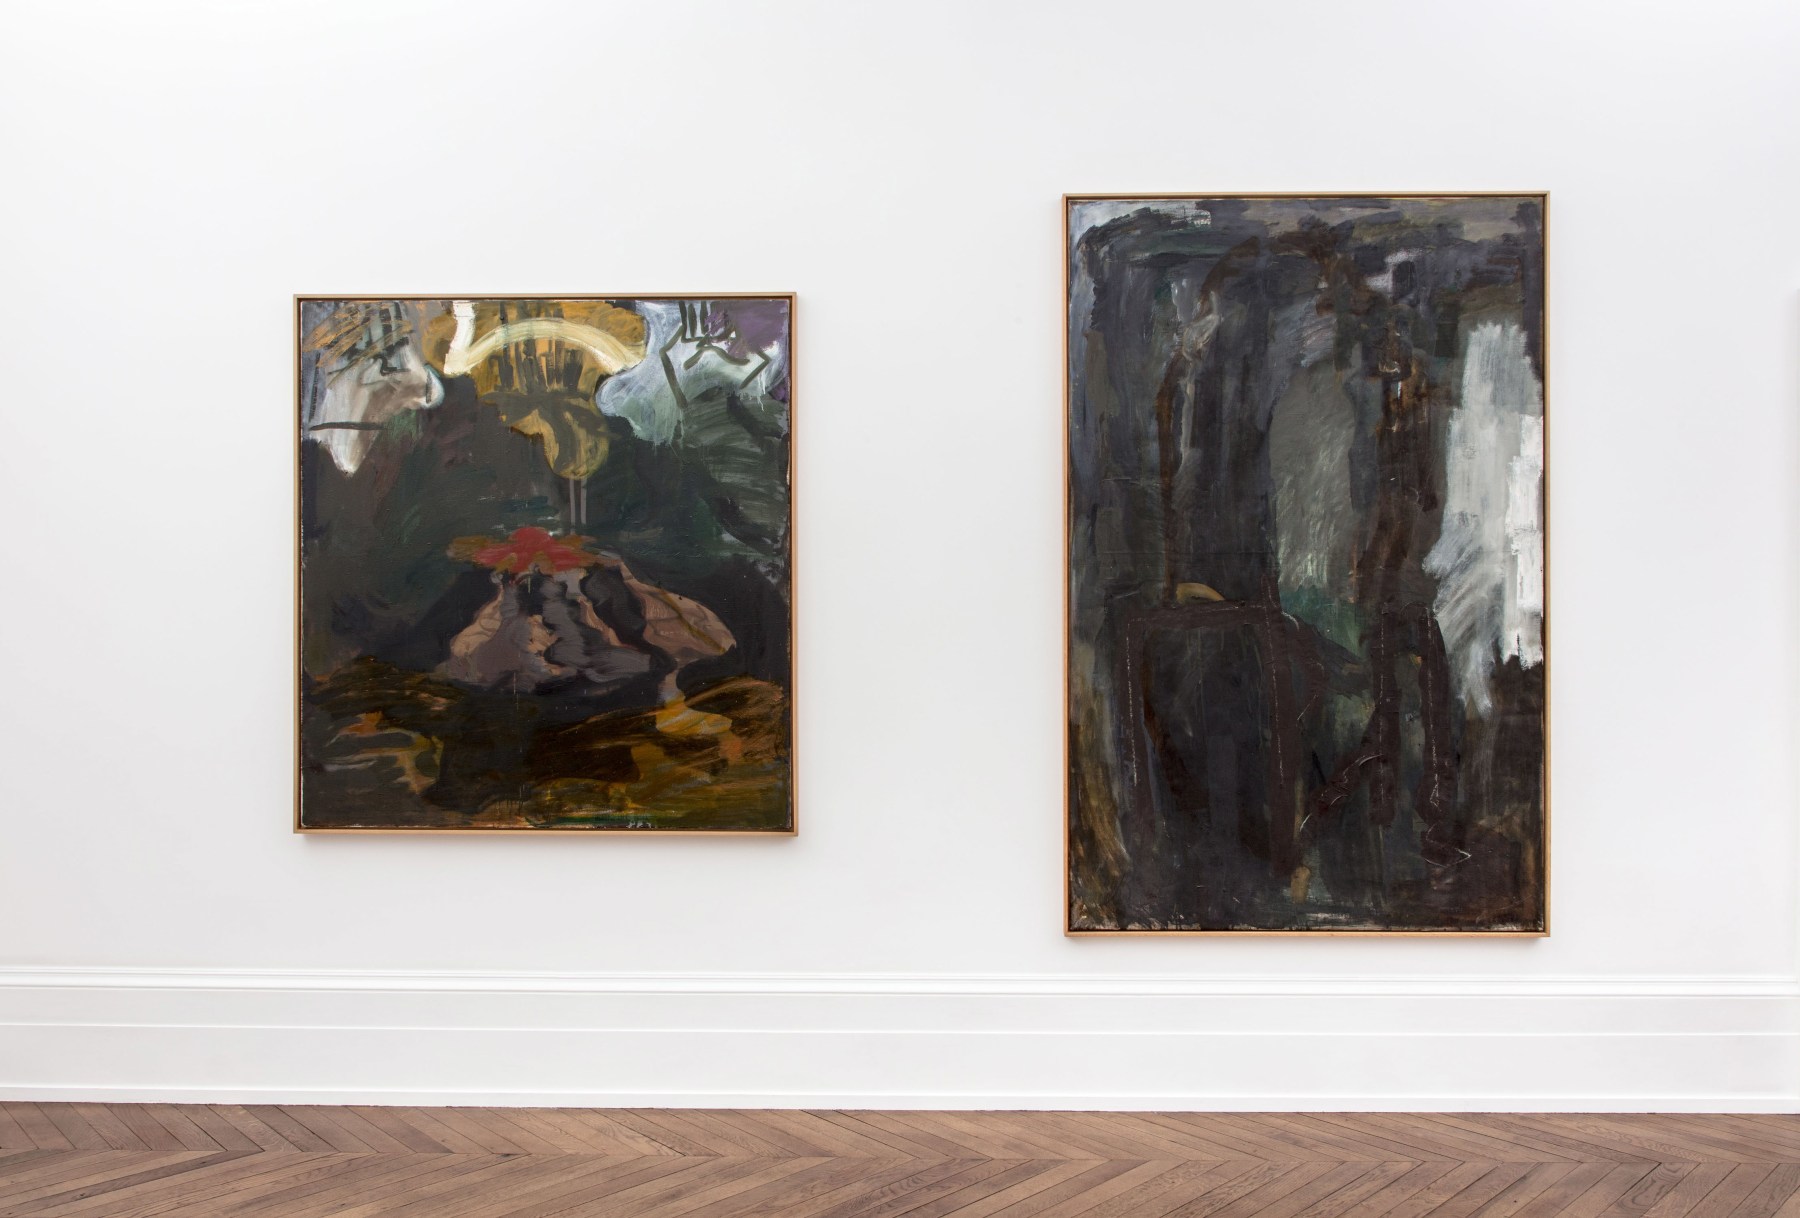 Per Kirkeby, Paintings and Bronzes from the 1980s, London, 2017, Installation Image 3